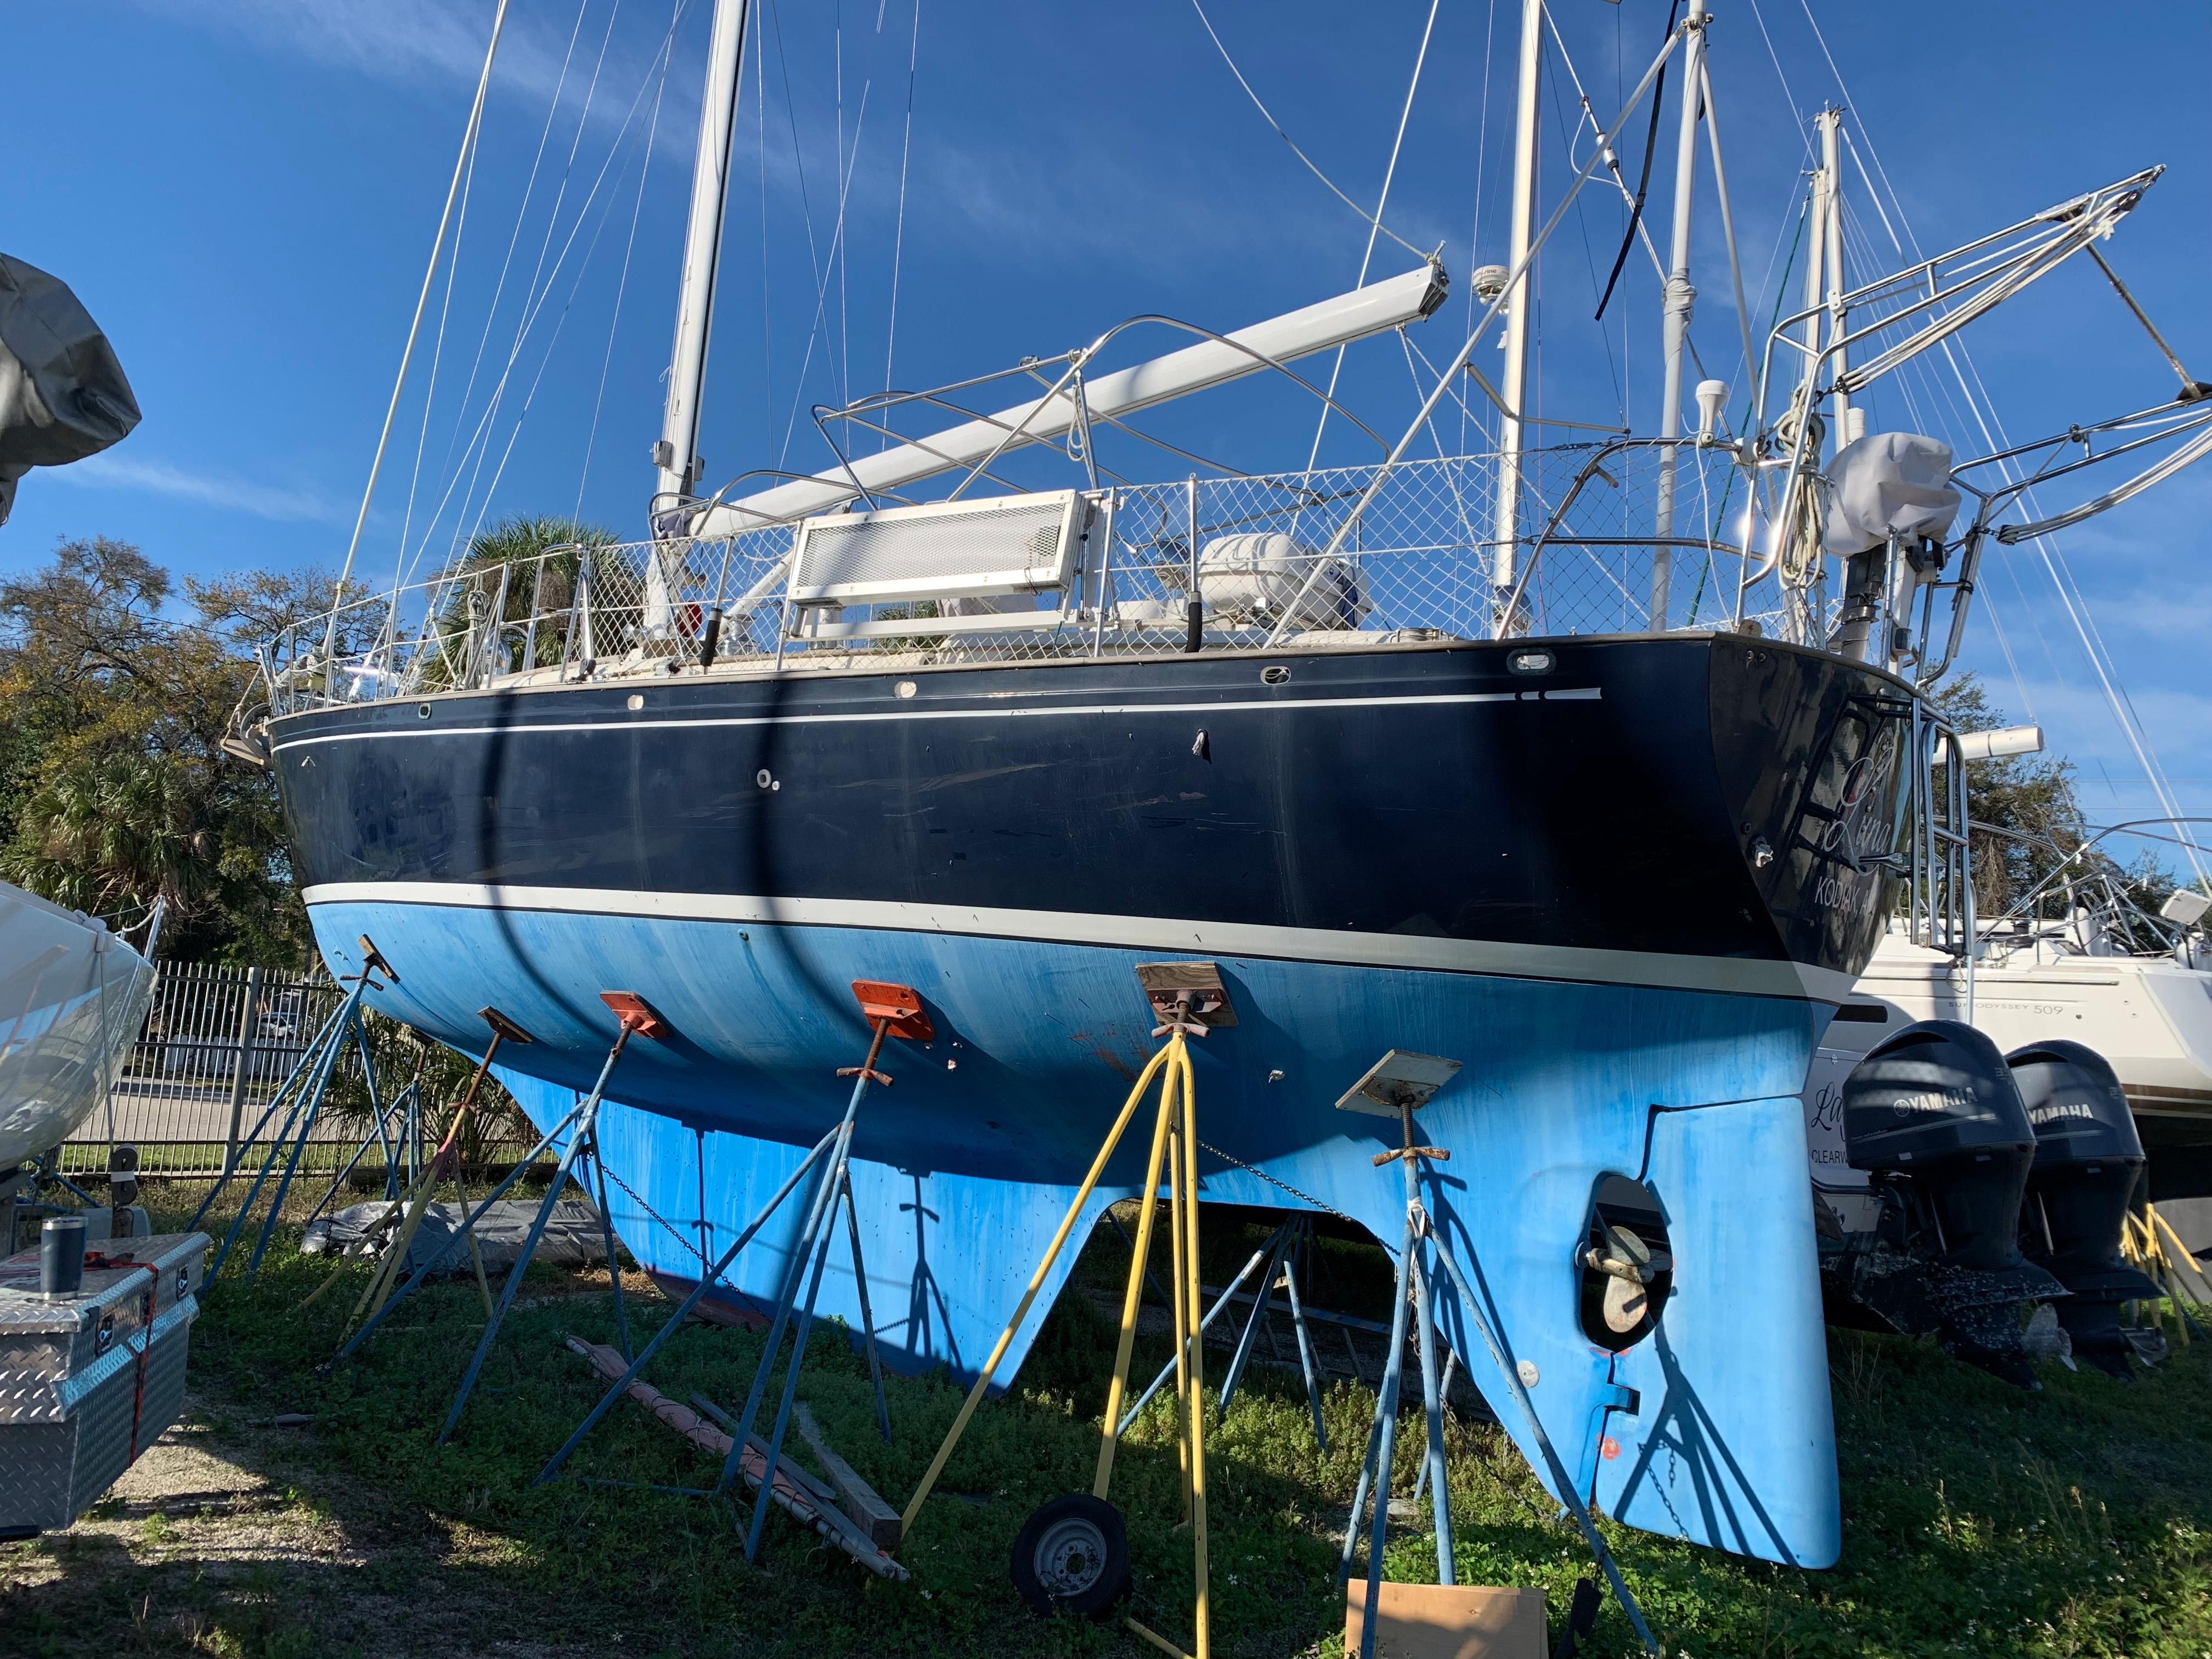 kelly peterson 44 sailboat for sale